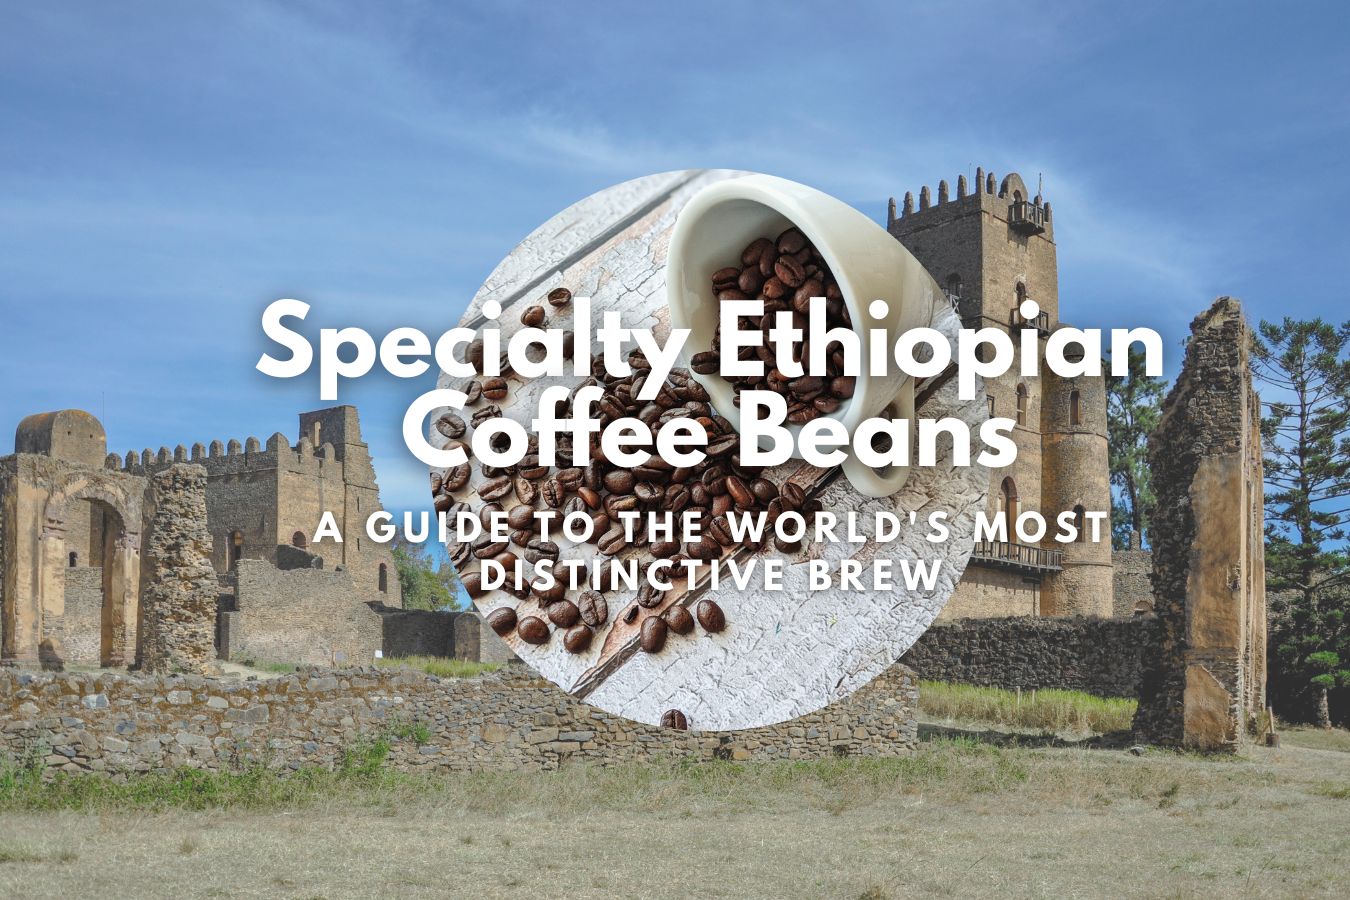 Specialty Ethiopian Coffee Beans A Guide to the World's Most Distinctive Brew